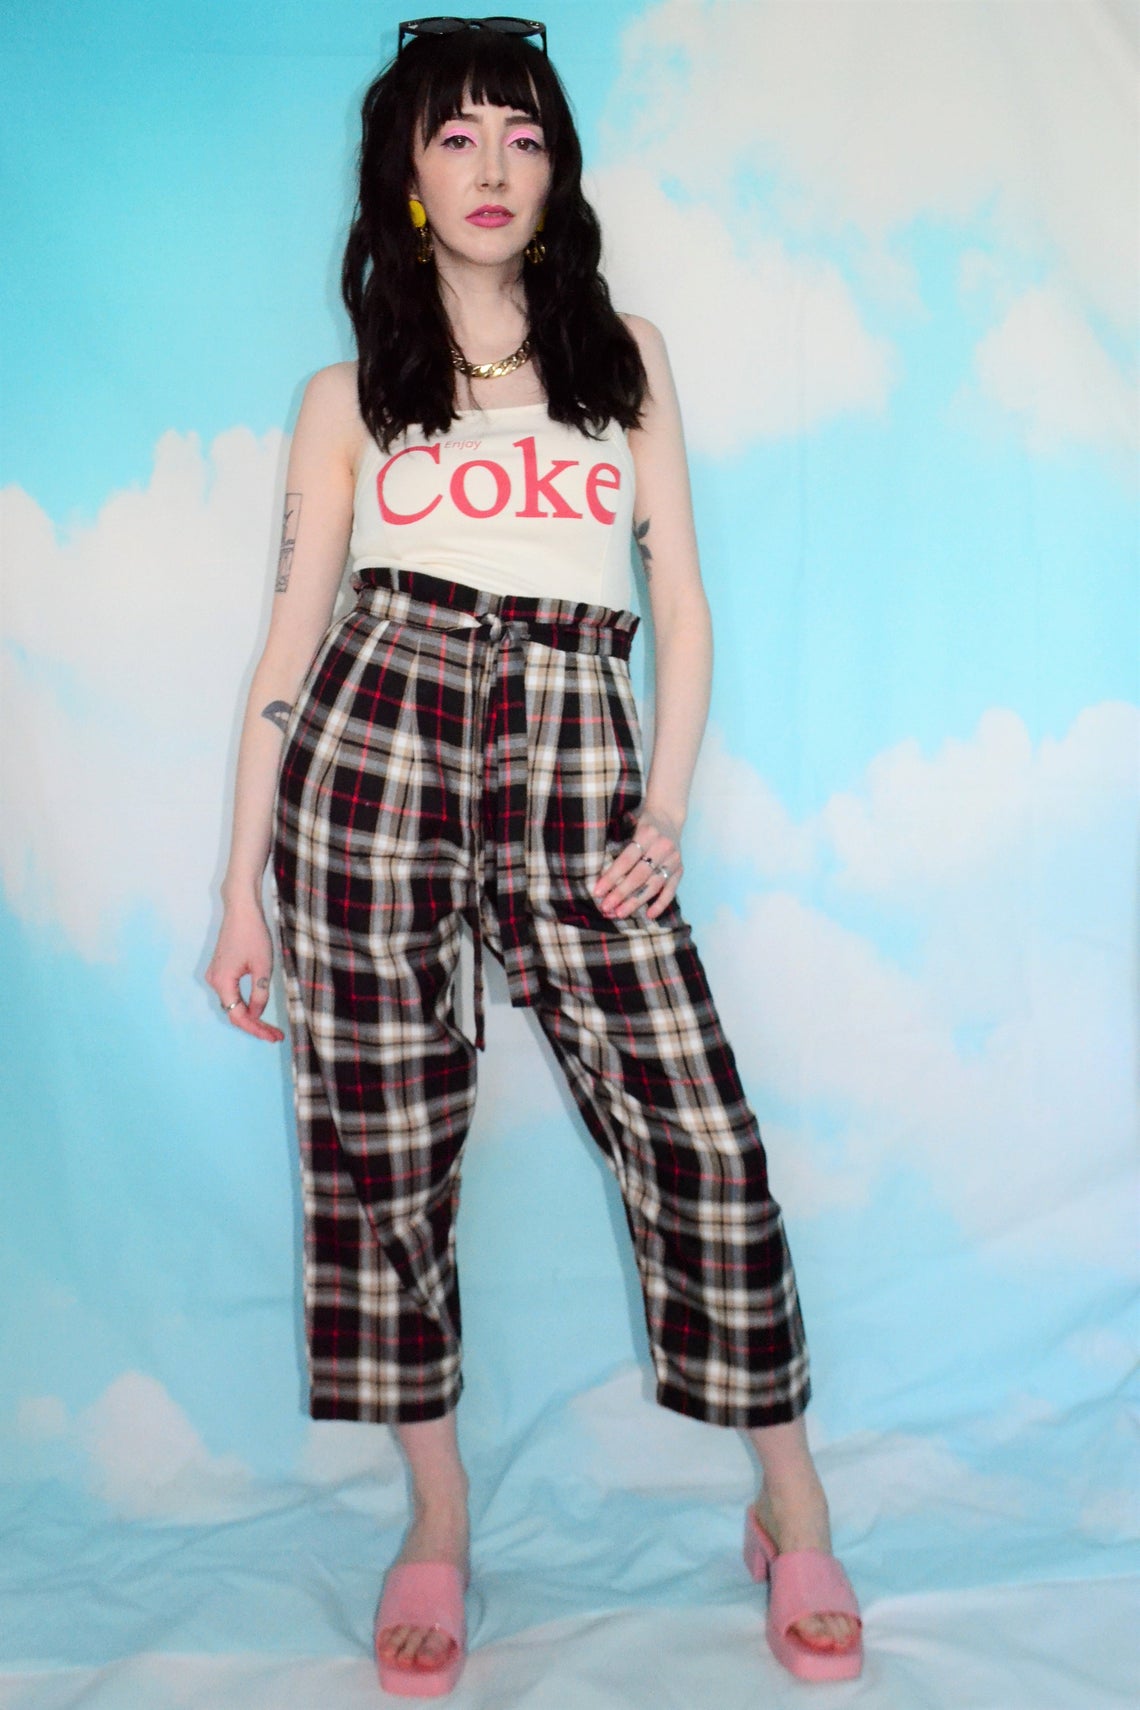 Vintage 90's Checked Plaid Cropped Trousers - Tartan Pants Patterned Check Print Black, Beige, White and Red